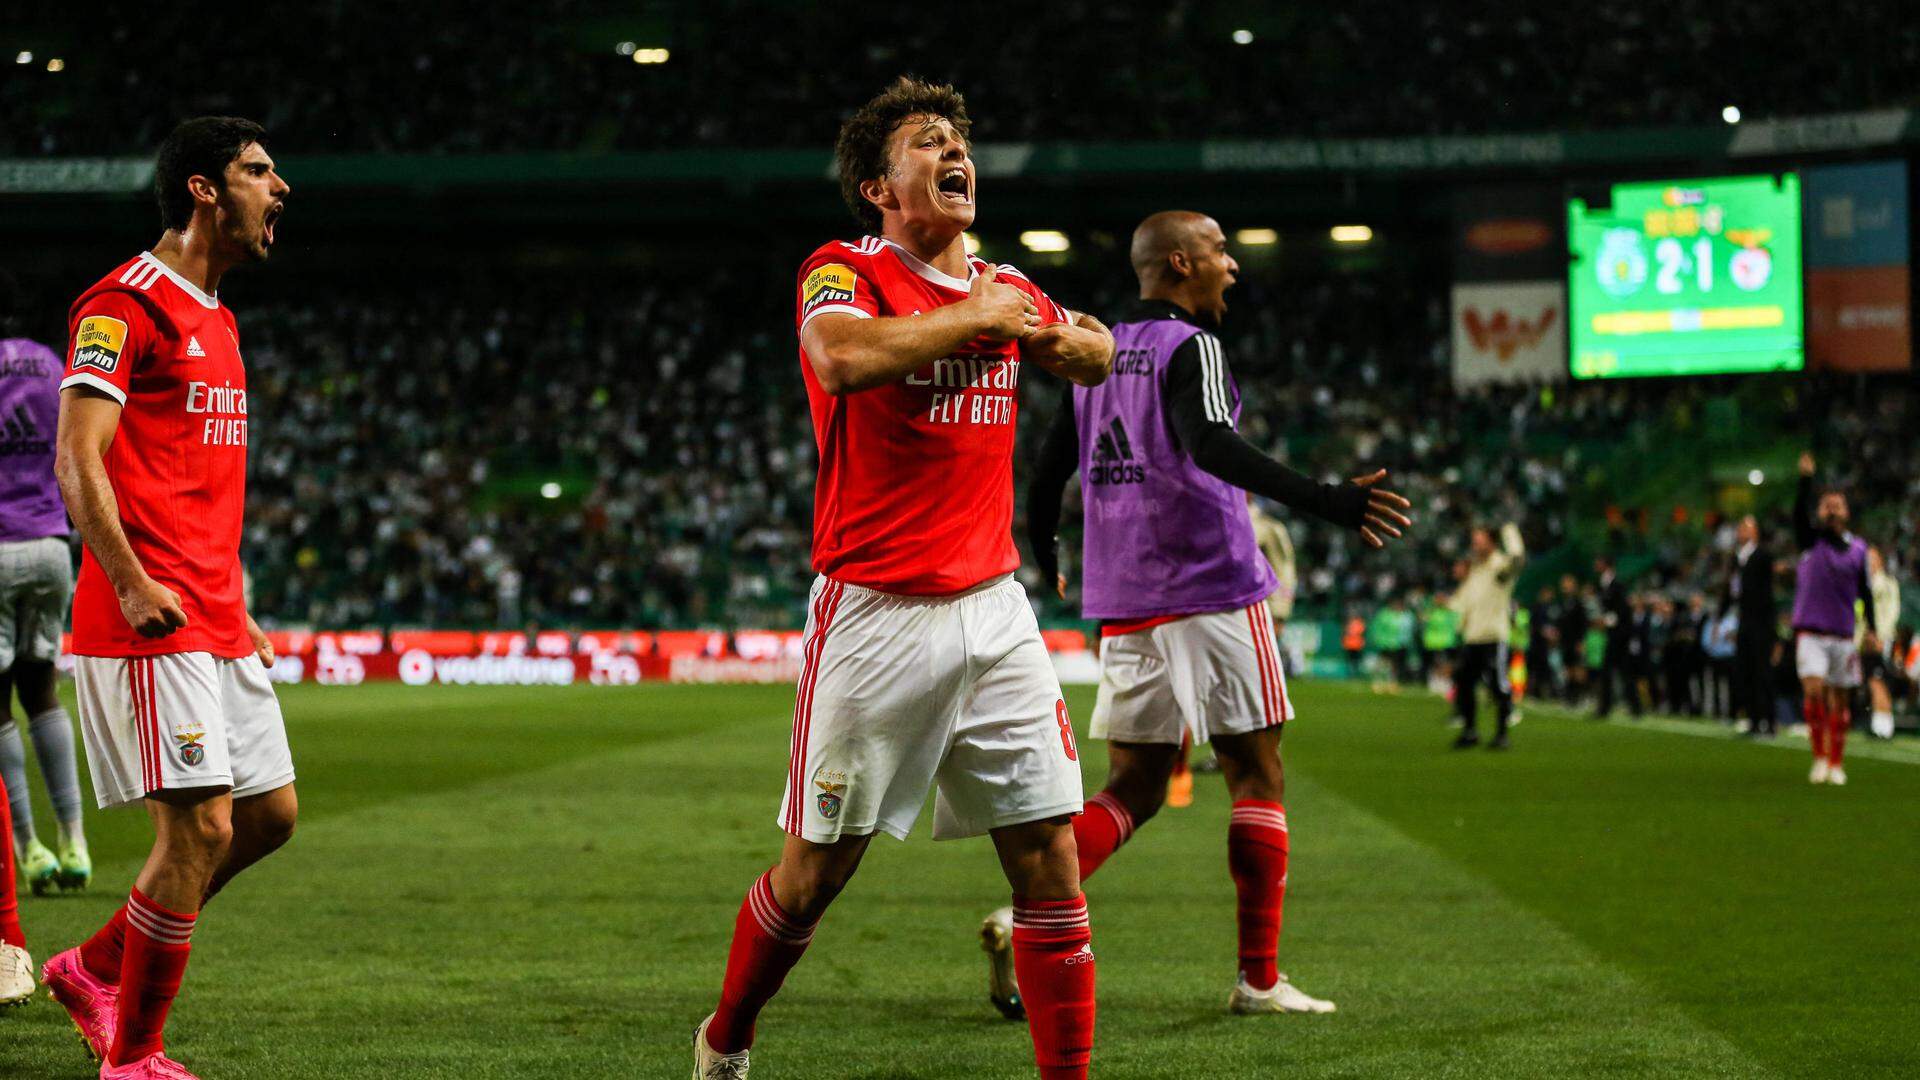 Benfica's Portuguese midfielder Joao Neves celebrates scoring the equalizing goal during the Portuguese league football match between Sporting CP and SL Benfica at the Jose Alvalade stadium in Lisbon on May 21, 2023. (Photo by CARLOS COSTA / AFP)